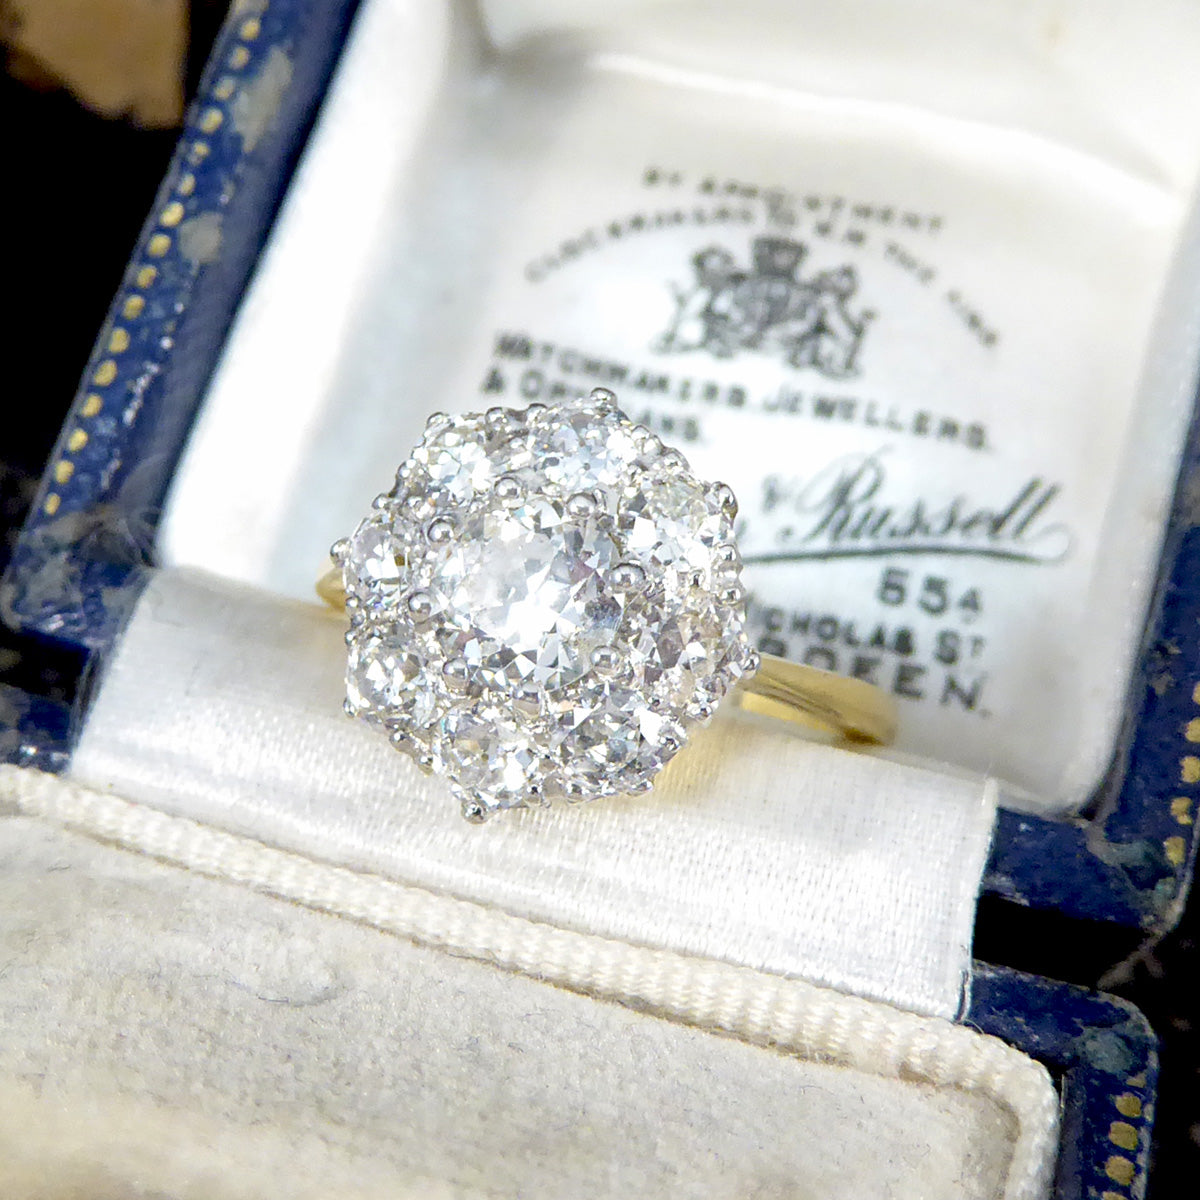 Edwardian Style 1.85ct Old Cut Diamond Daisy Cluster Ring in 18ct Yellow Gold